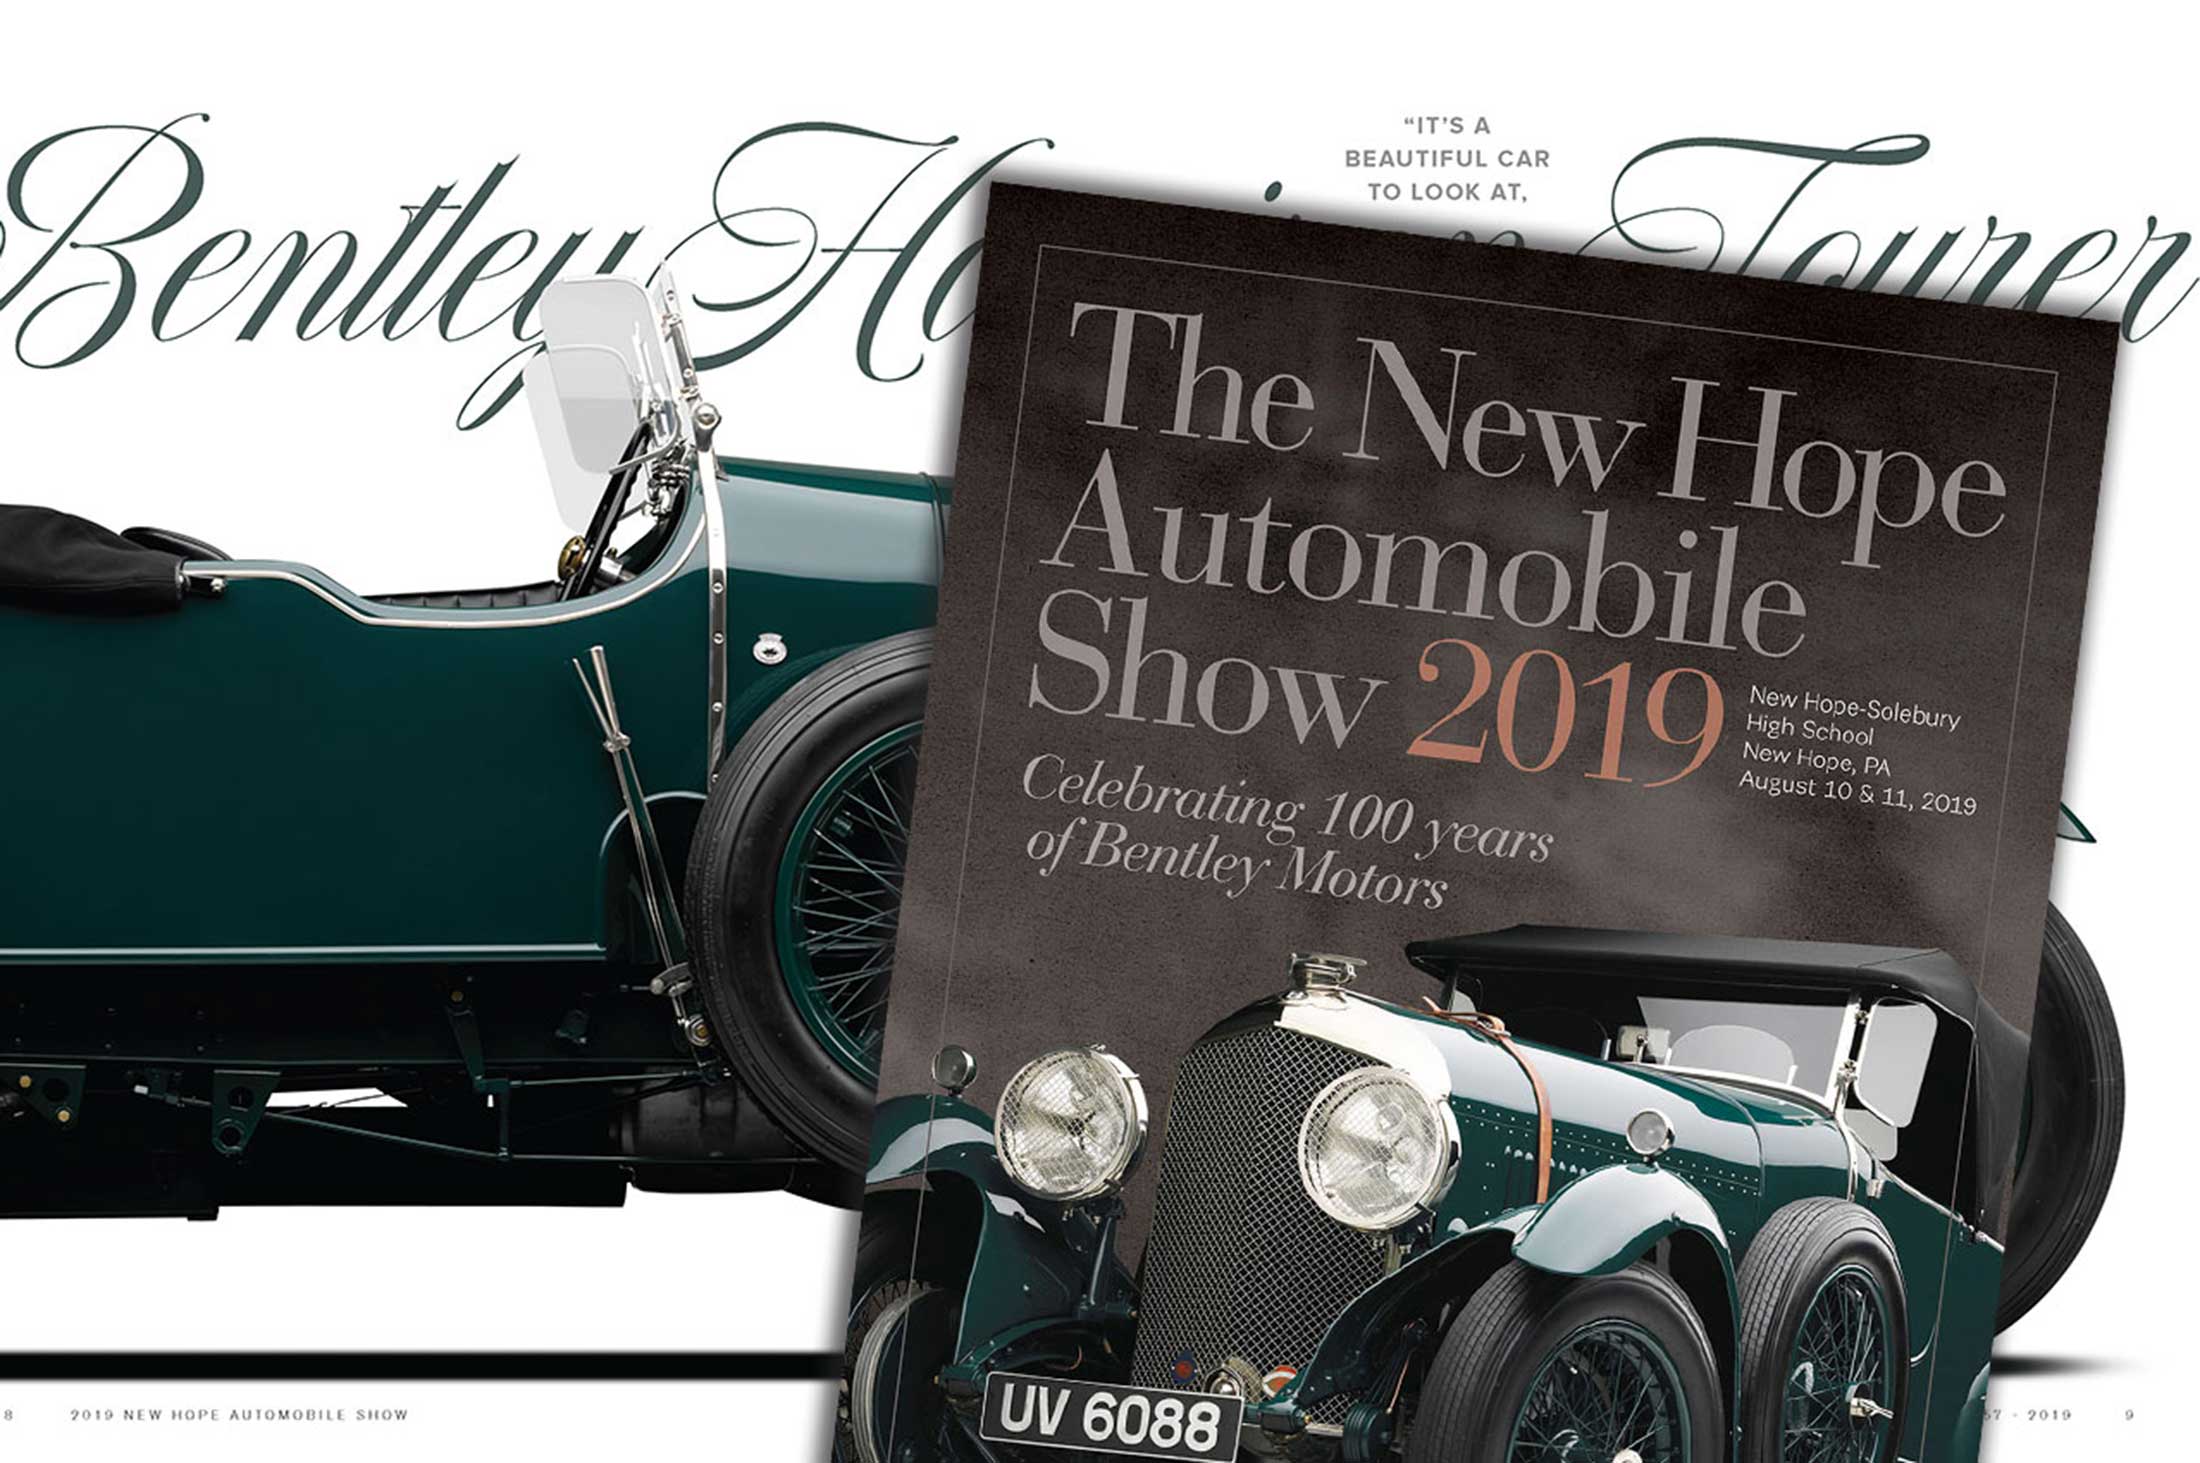 Inside spread and cover of the 2019 New Hope Automobile Show program book